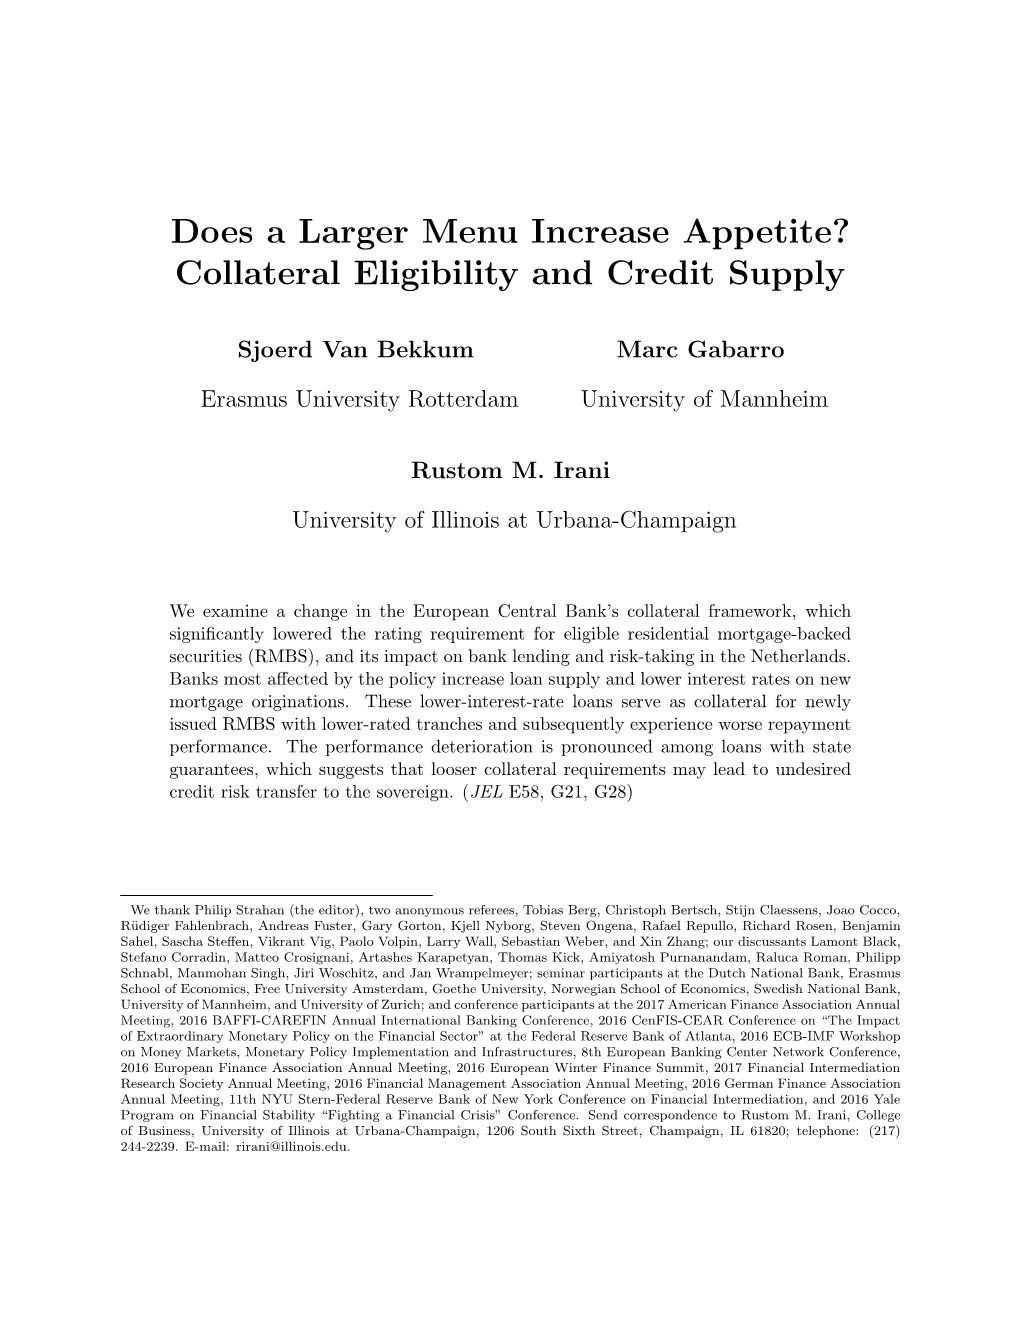 Does a Larger Menu Increase Appetite? Collateral Eligibility and Credit Supply